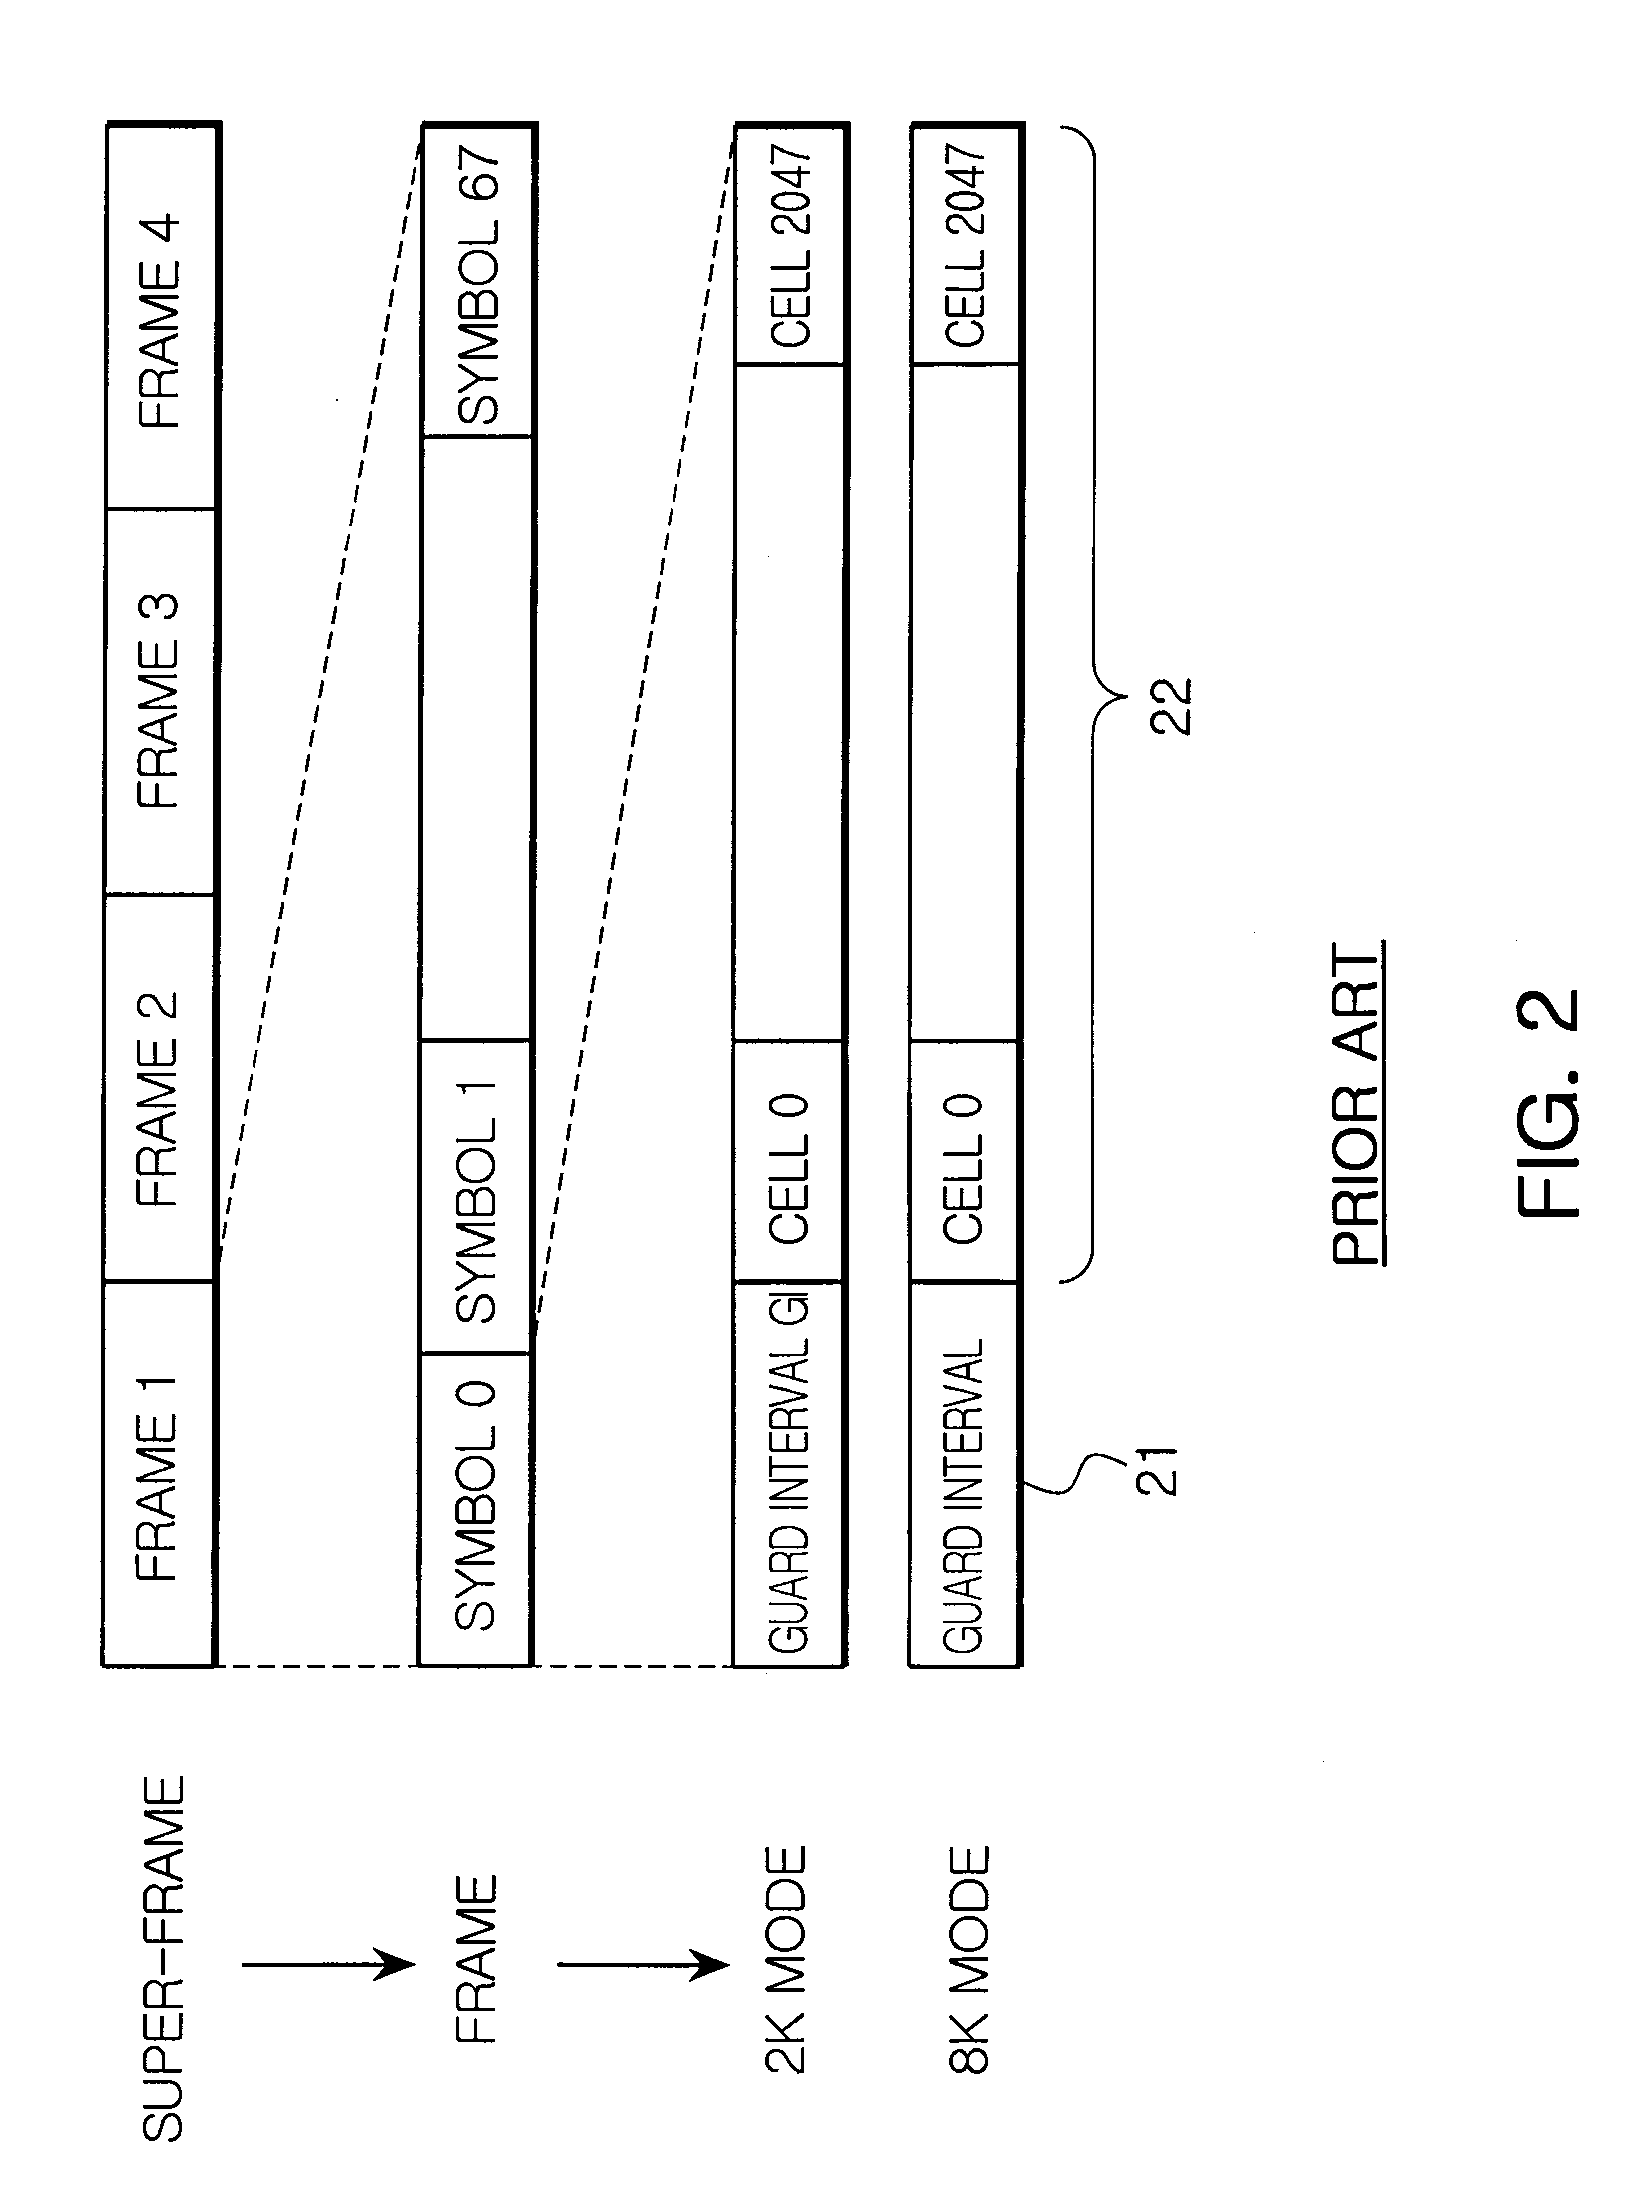 Sampling frequency offset estimation apparatus and method of OFDM system